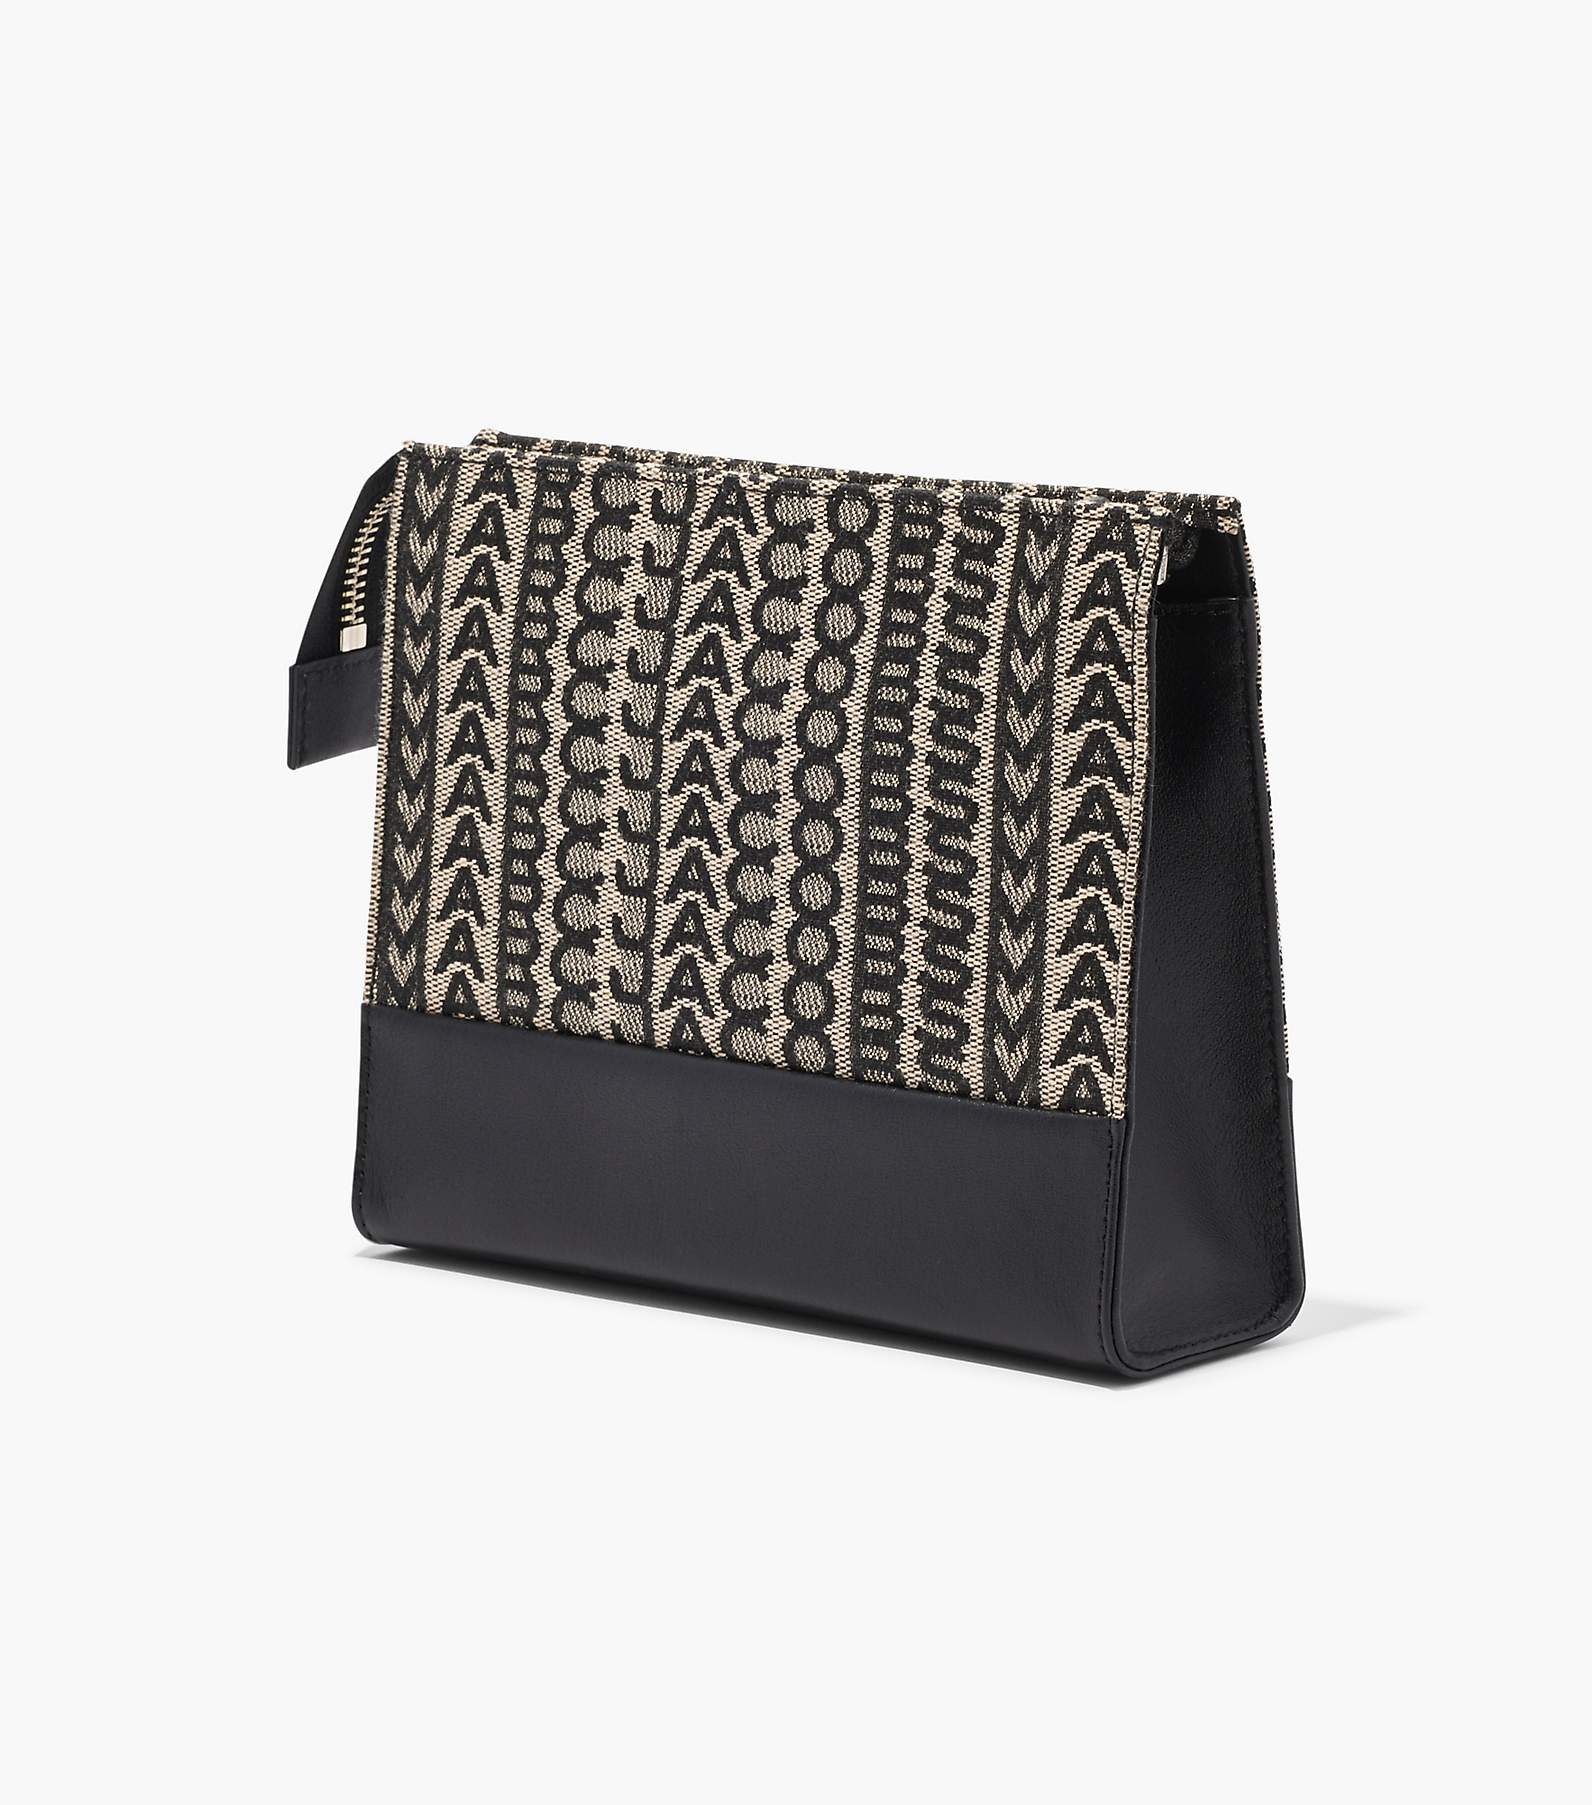 Marc Jacobs The Pouch Clutch Bag in Black